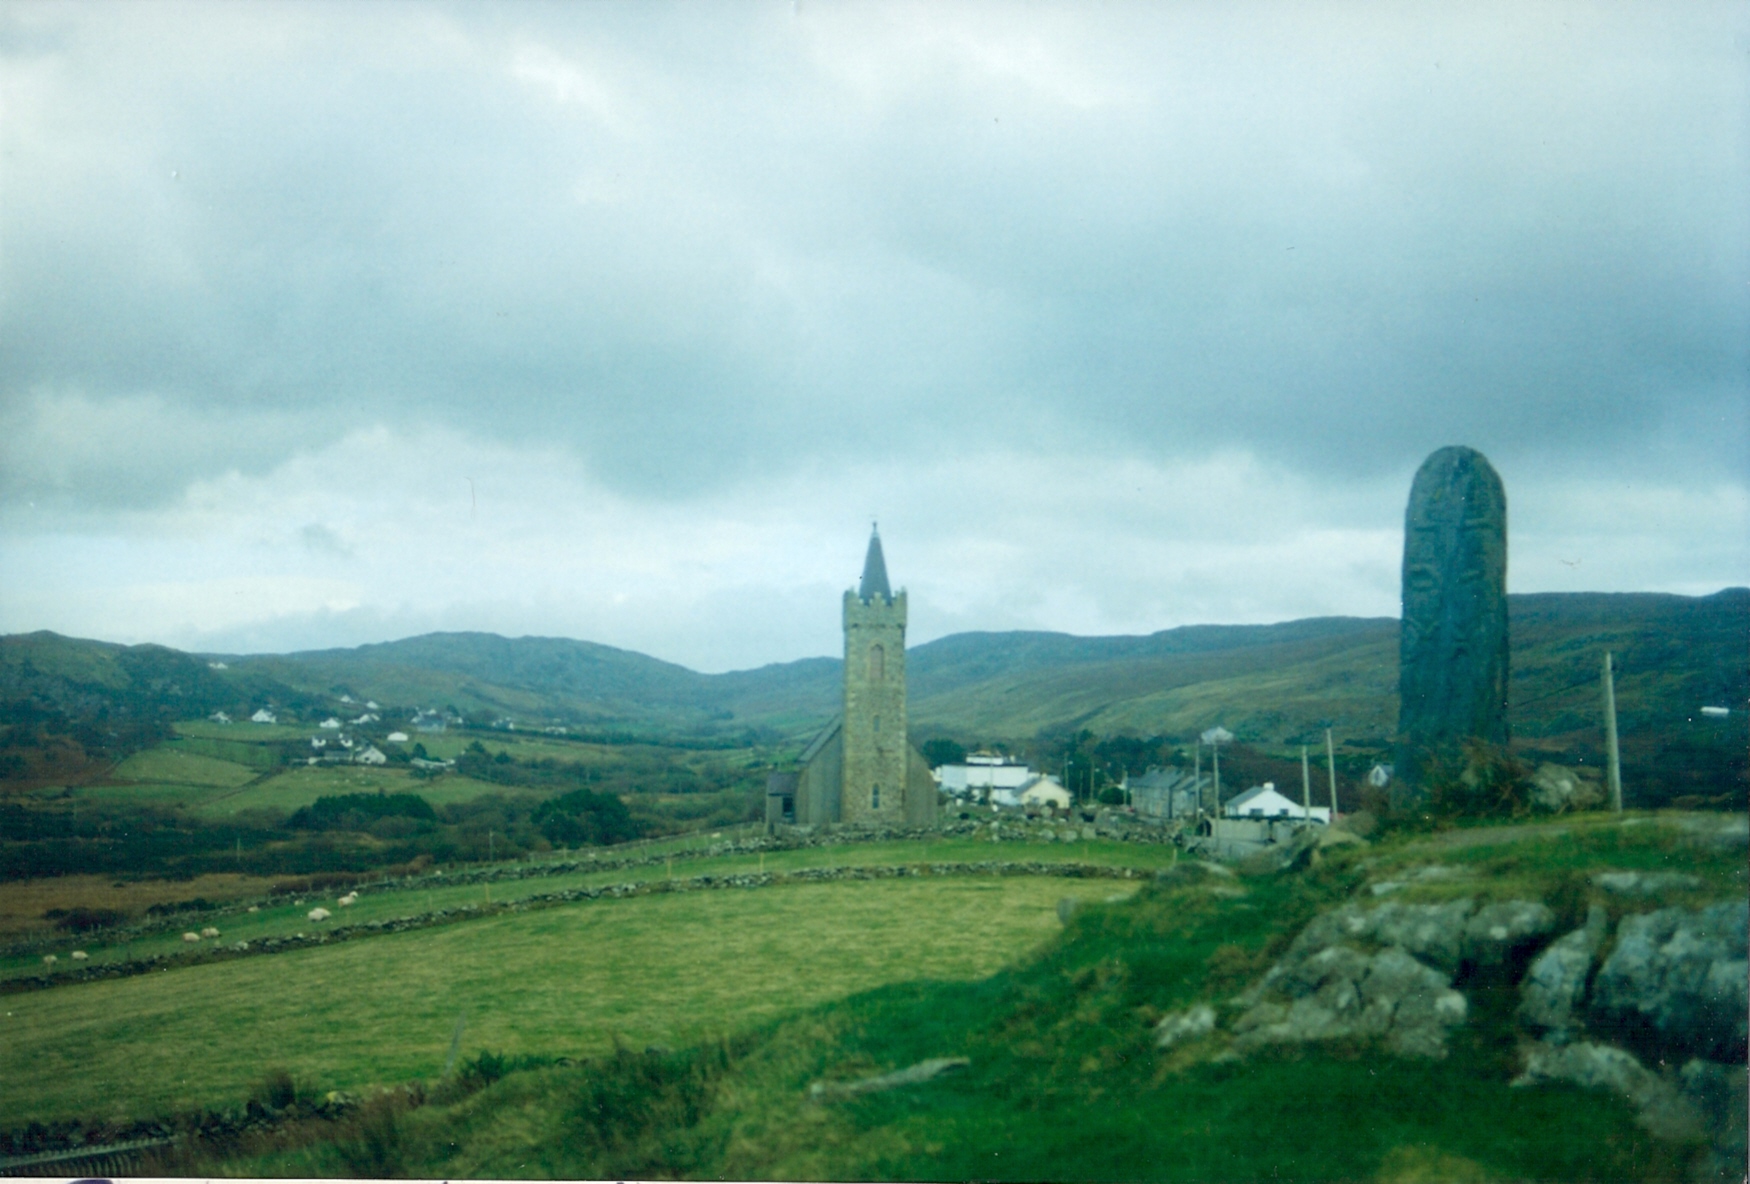 Glencolumbkille chapel and standing stone